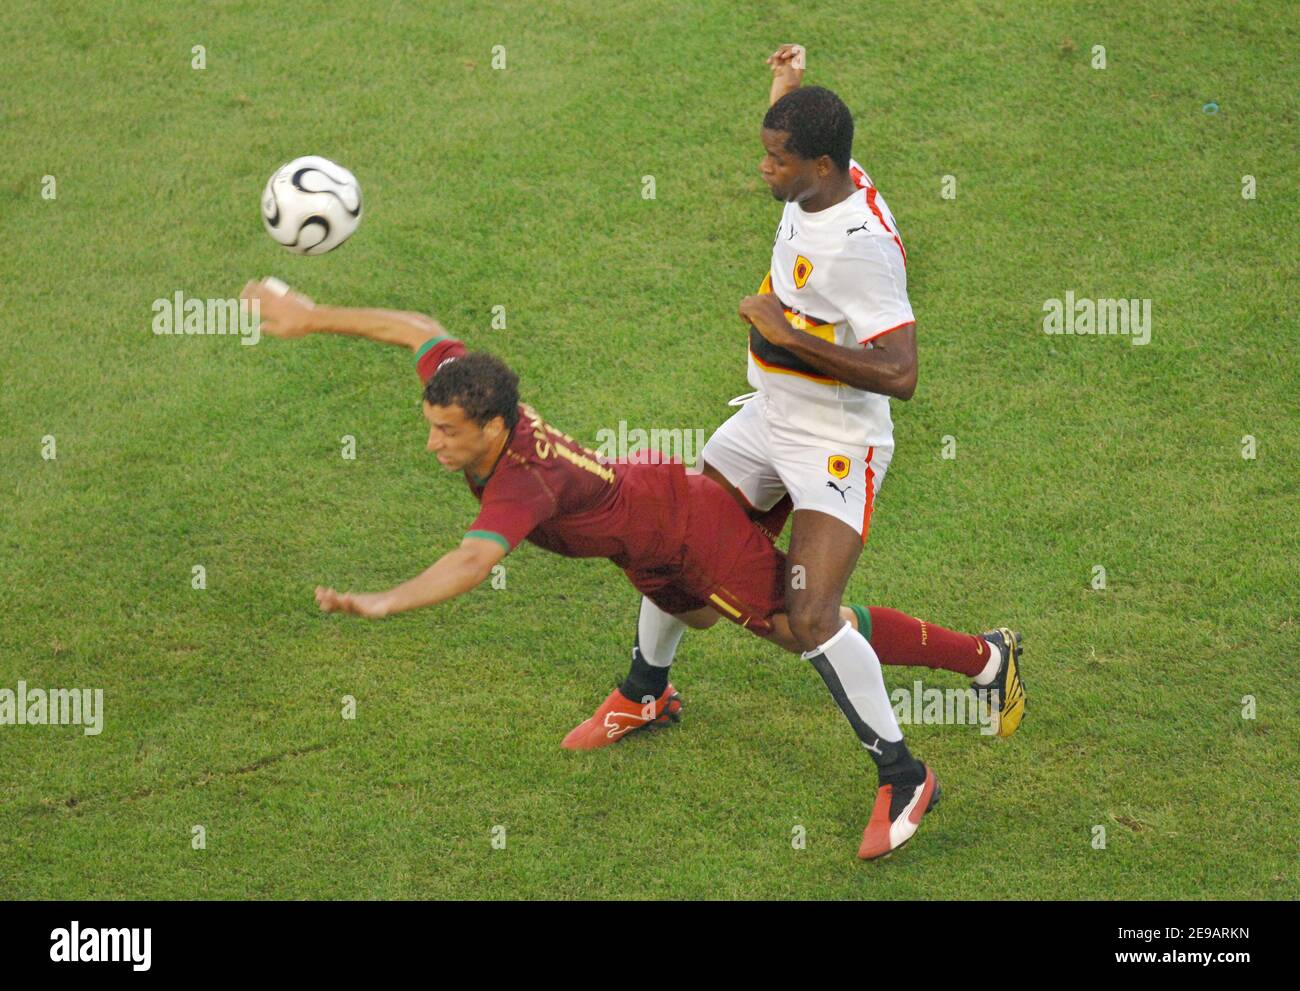 Portugal's Simao Sabrosa and Angola's Mateus in action during the World Cup 2006, Group D, Angola vs Portugal in Cologne, Germany on June 11, 2006. Portugal won 1-0. Photo by Gouhier-Hahn-Orban/Cameleon/ABACAPRESS.COM Stock Photo